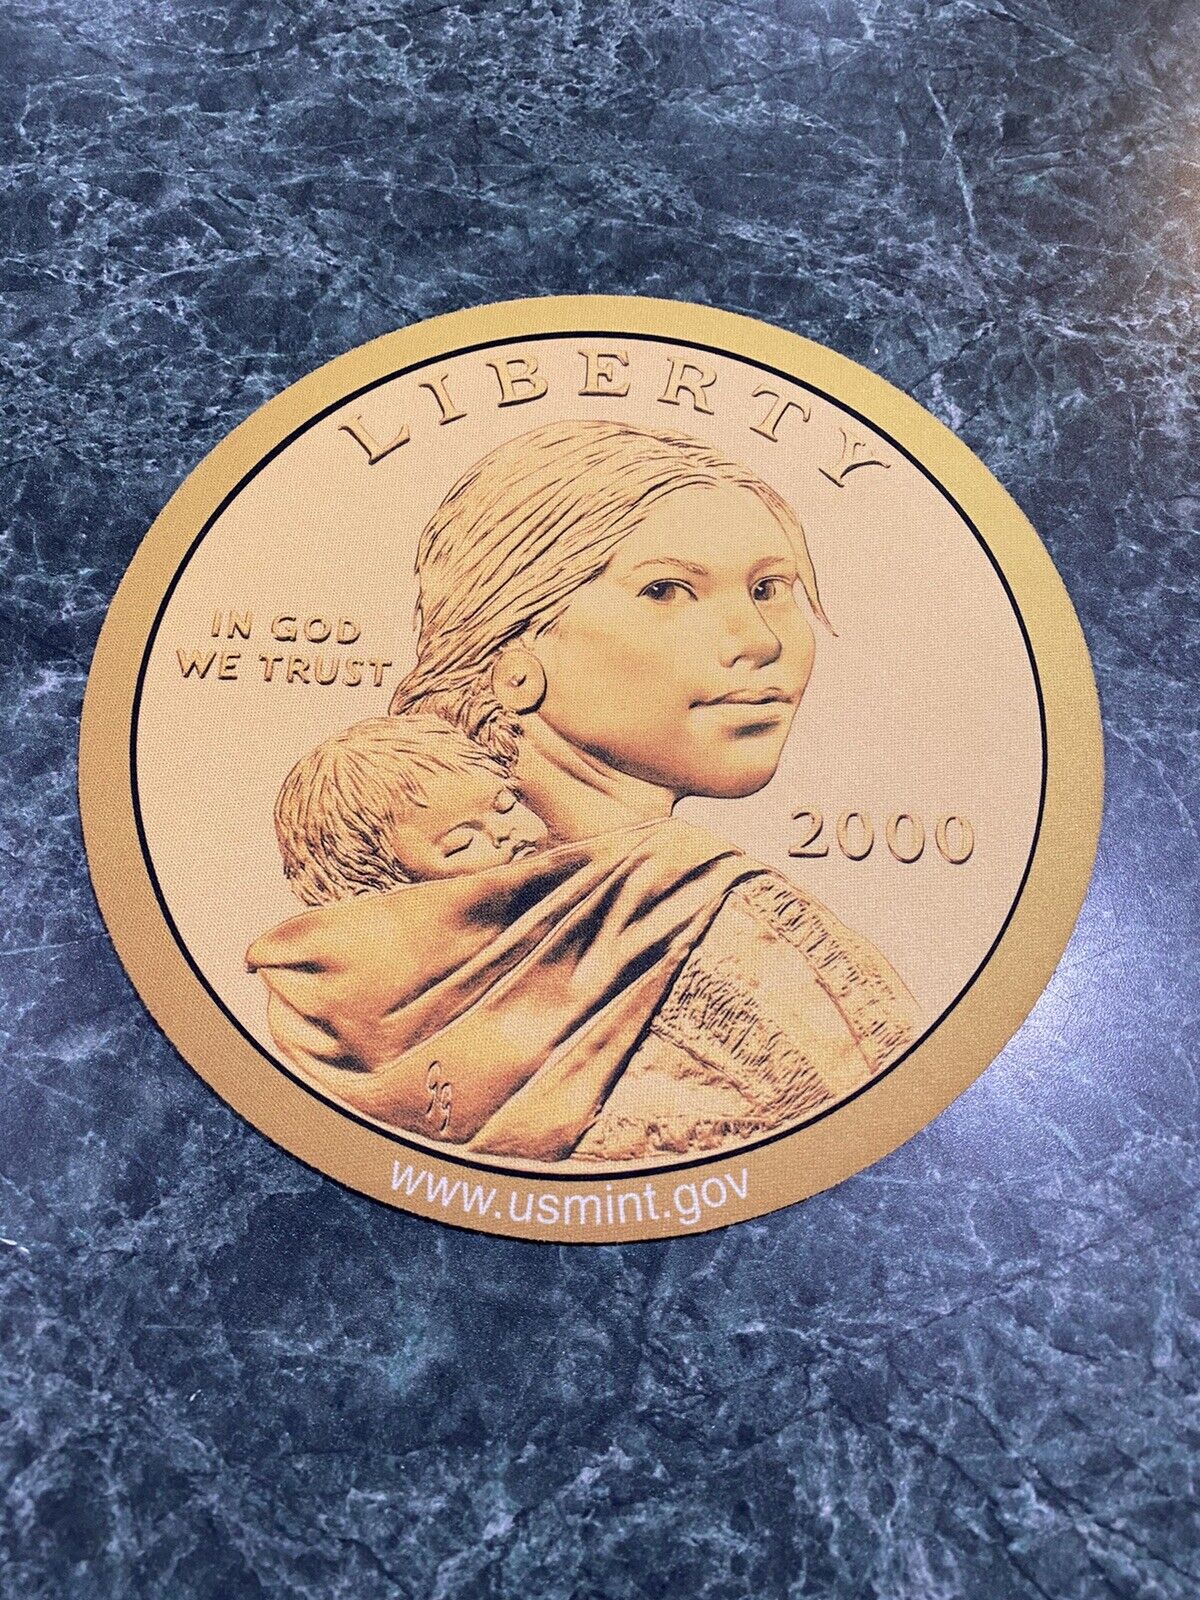 Vintage 2000 Sacagawea Golden Dollar Coin MOUSE PAD US MINT - Never Used